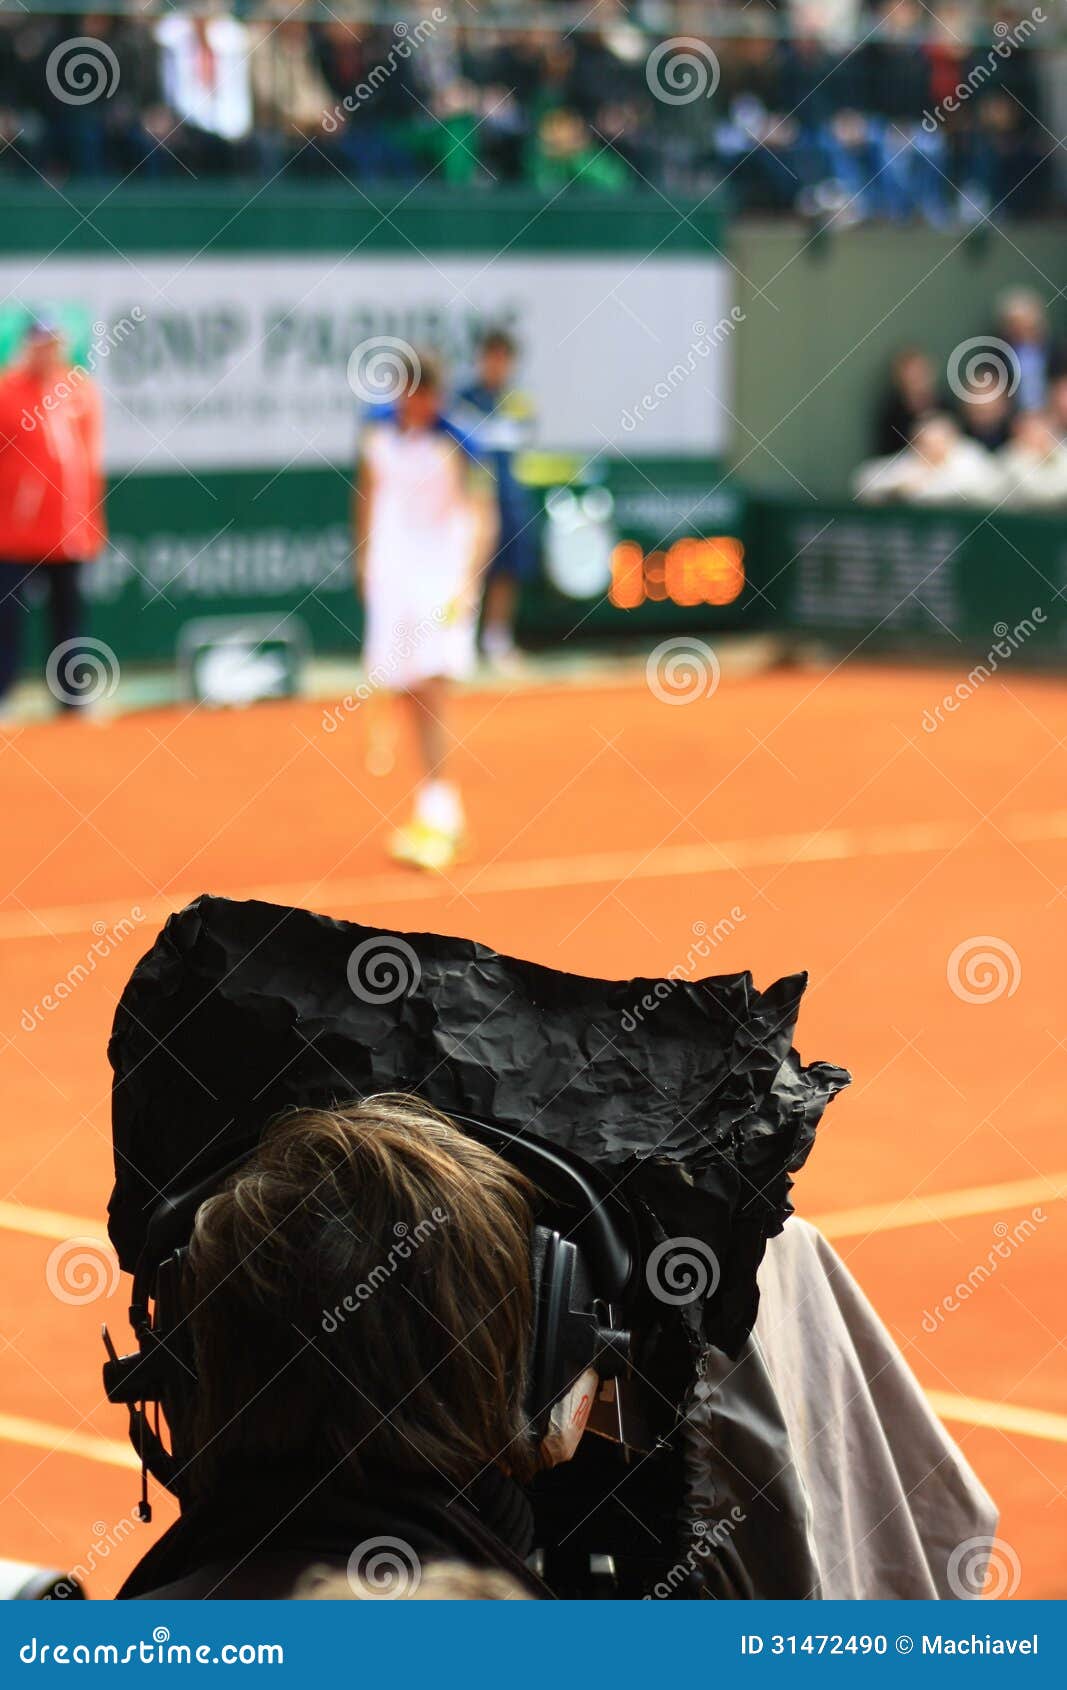 Roland Garros 2013, Broadcasted on TV Editorial Image